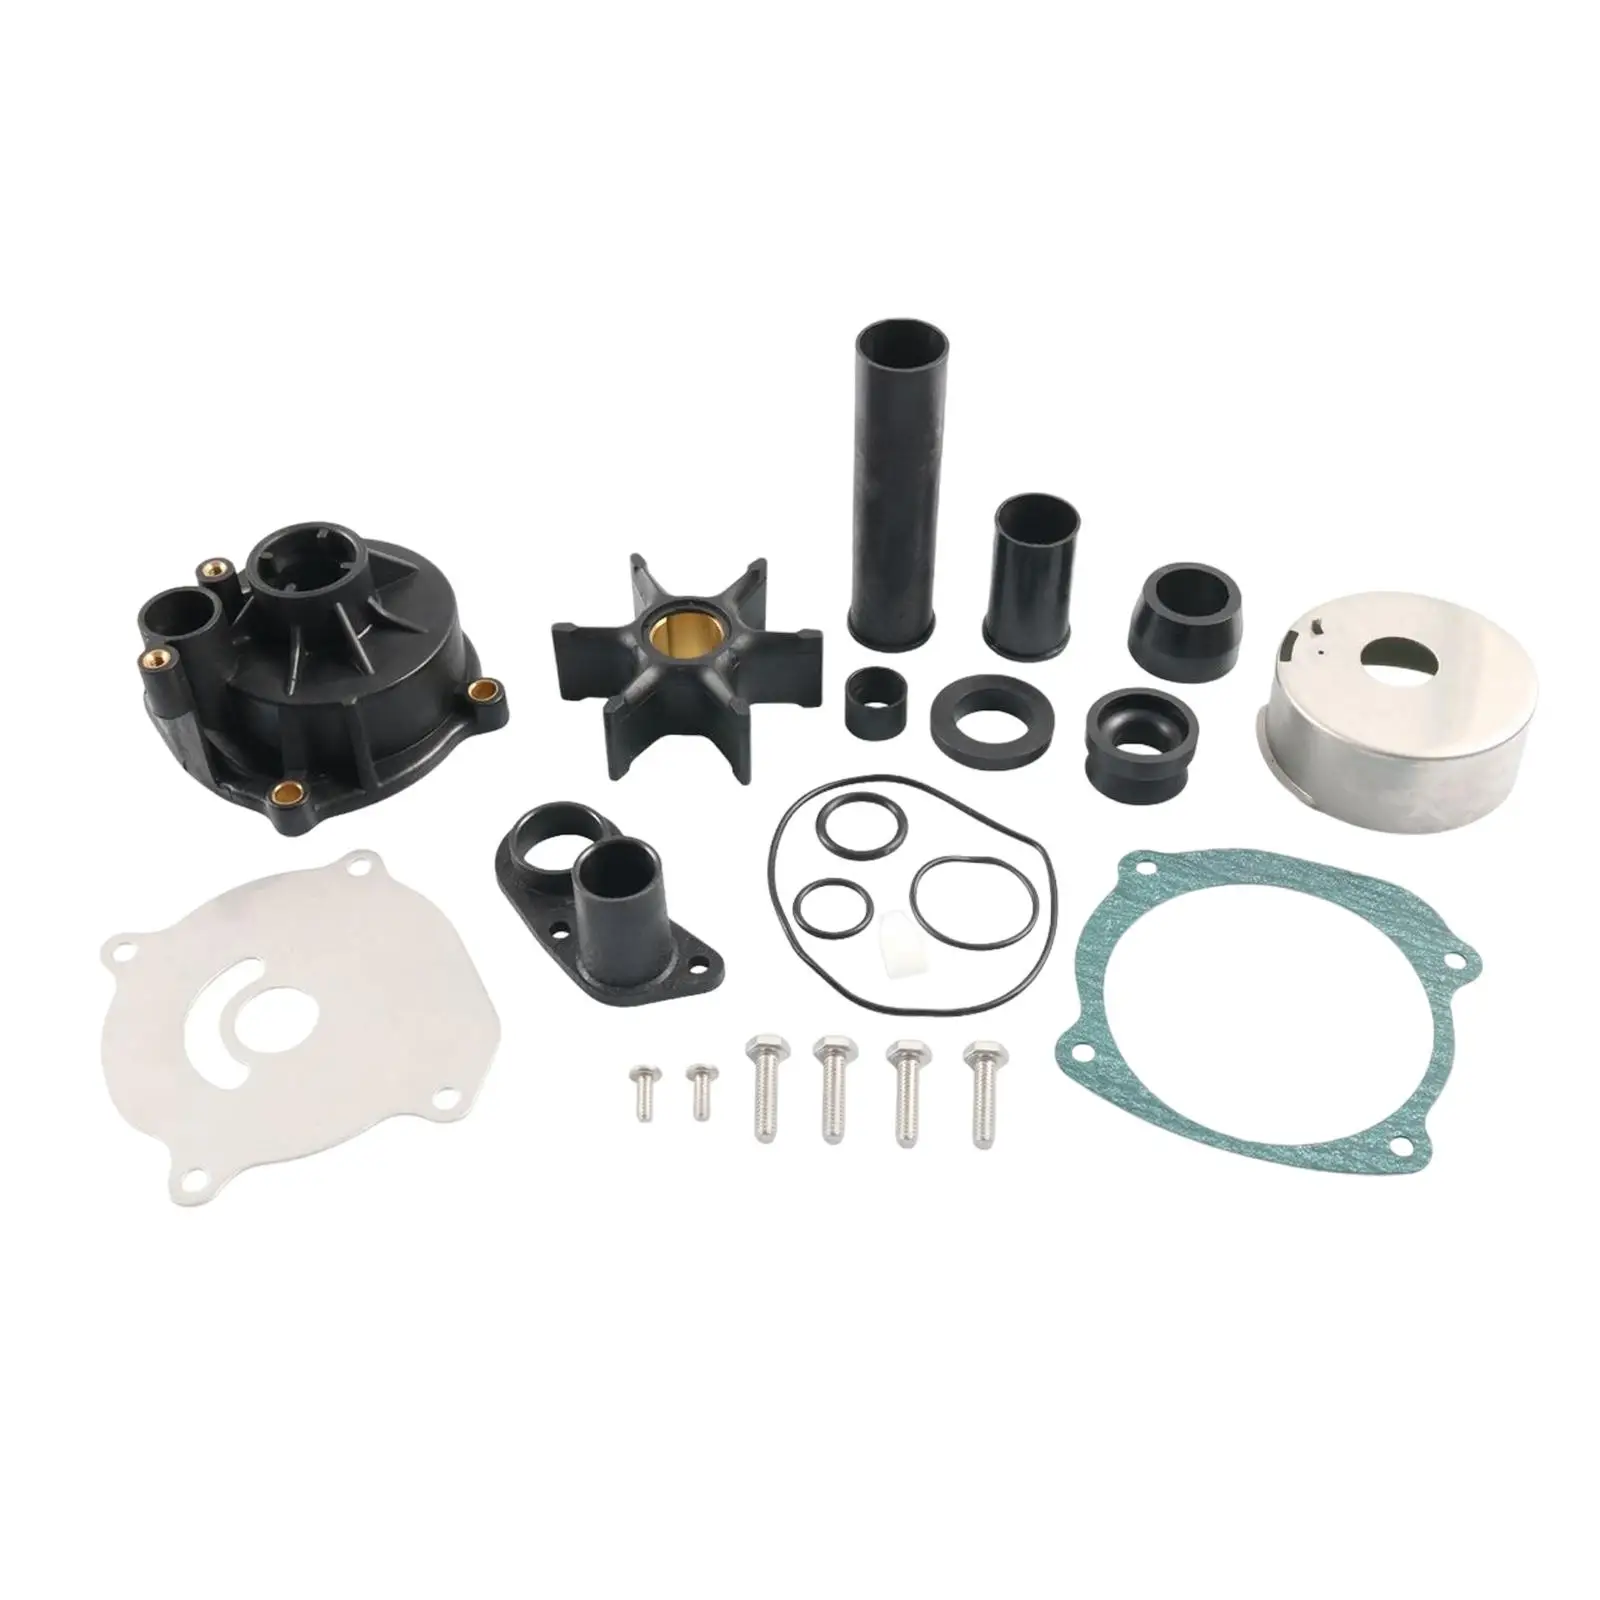 Water Pump Kit with Housing for Johnson Evinrude 140HP High Performance